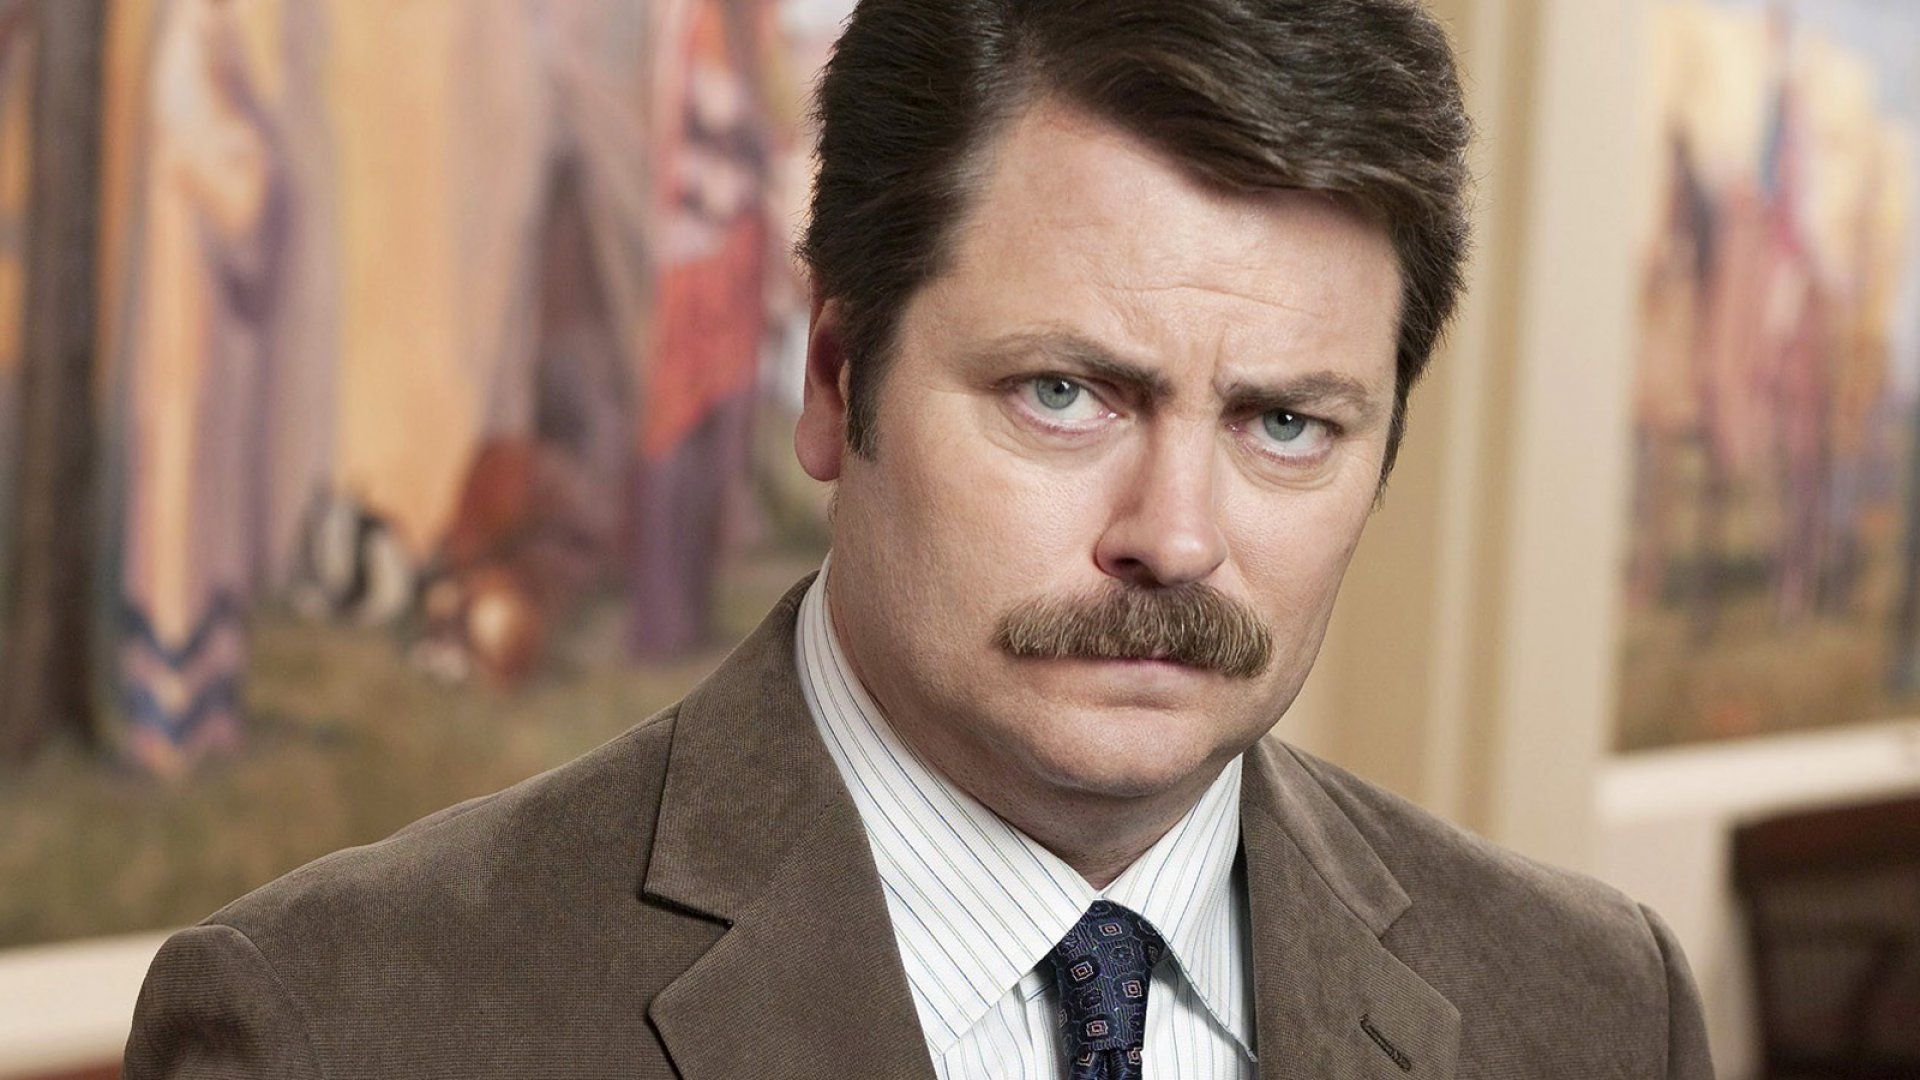 Lessons from Ron Swanson: How to Speak in Results, Not Buzzwords